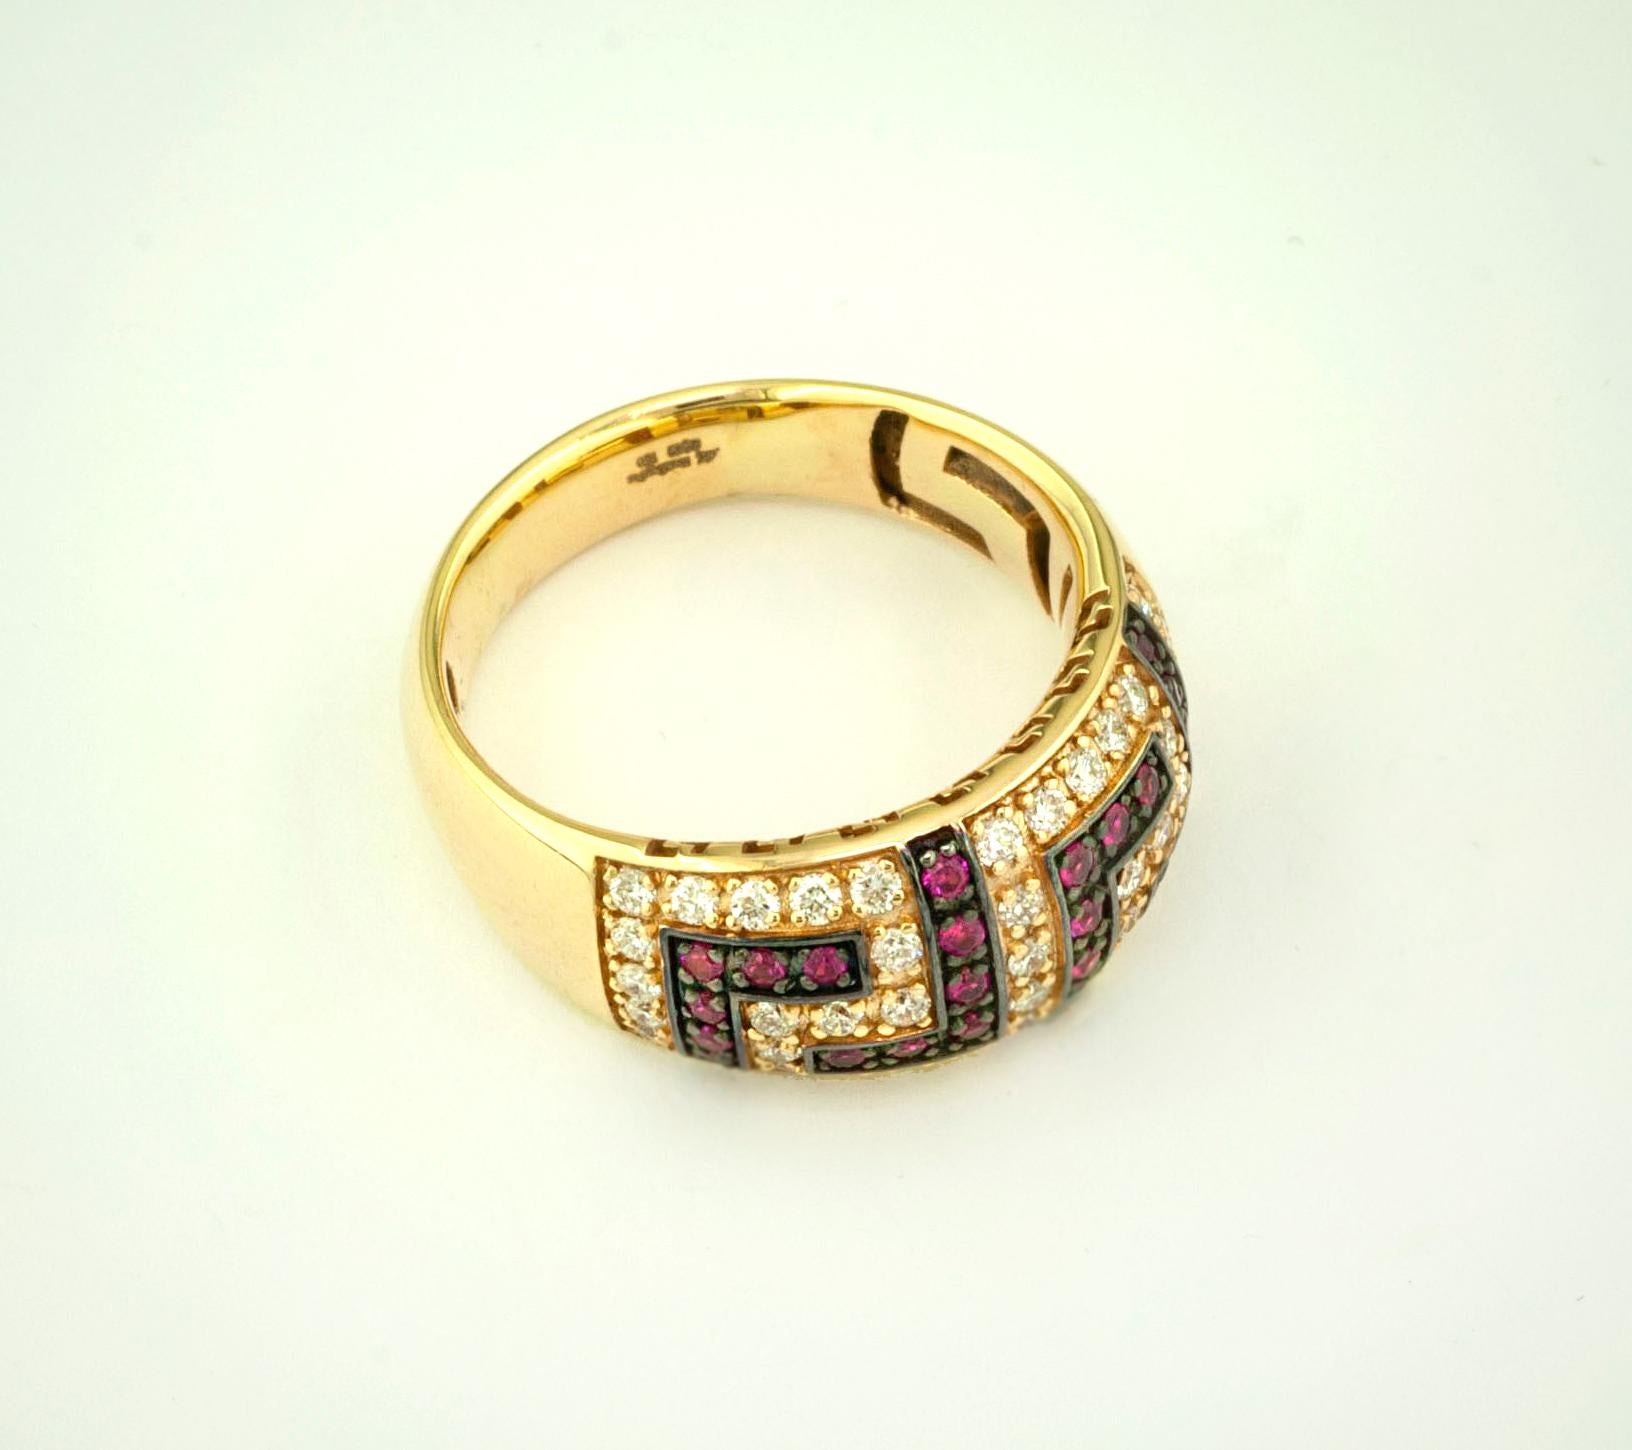 This S.Georgios designer 18 Karat Yellow Gold Greek Key Band Ring is all handmade in a unique two-tone look. The gorgeous band features brilliant cut diamonds forming the Greek Key design total weight of 0.52 Carat, and natural Rubys total weight of